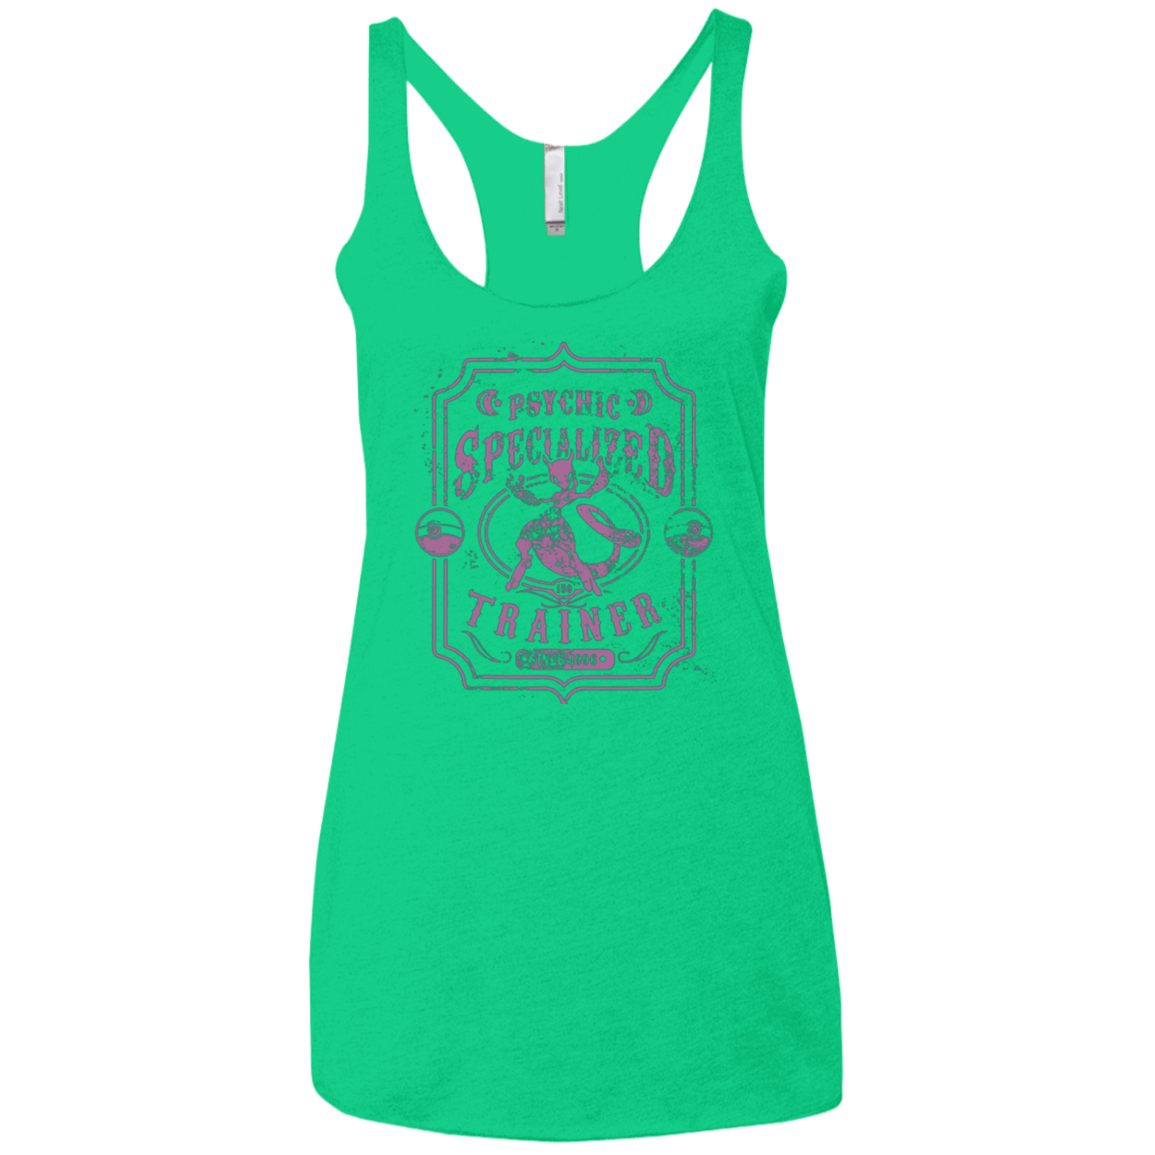 T-Shirts Envy / X-Small Psychic Specialized Trainer 2 Women's Triblend Racerback Tank